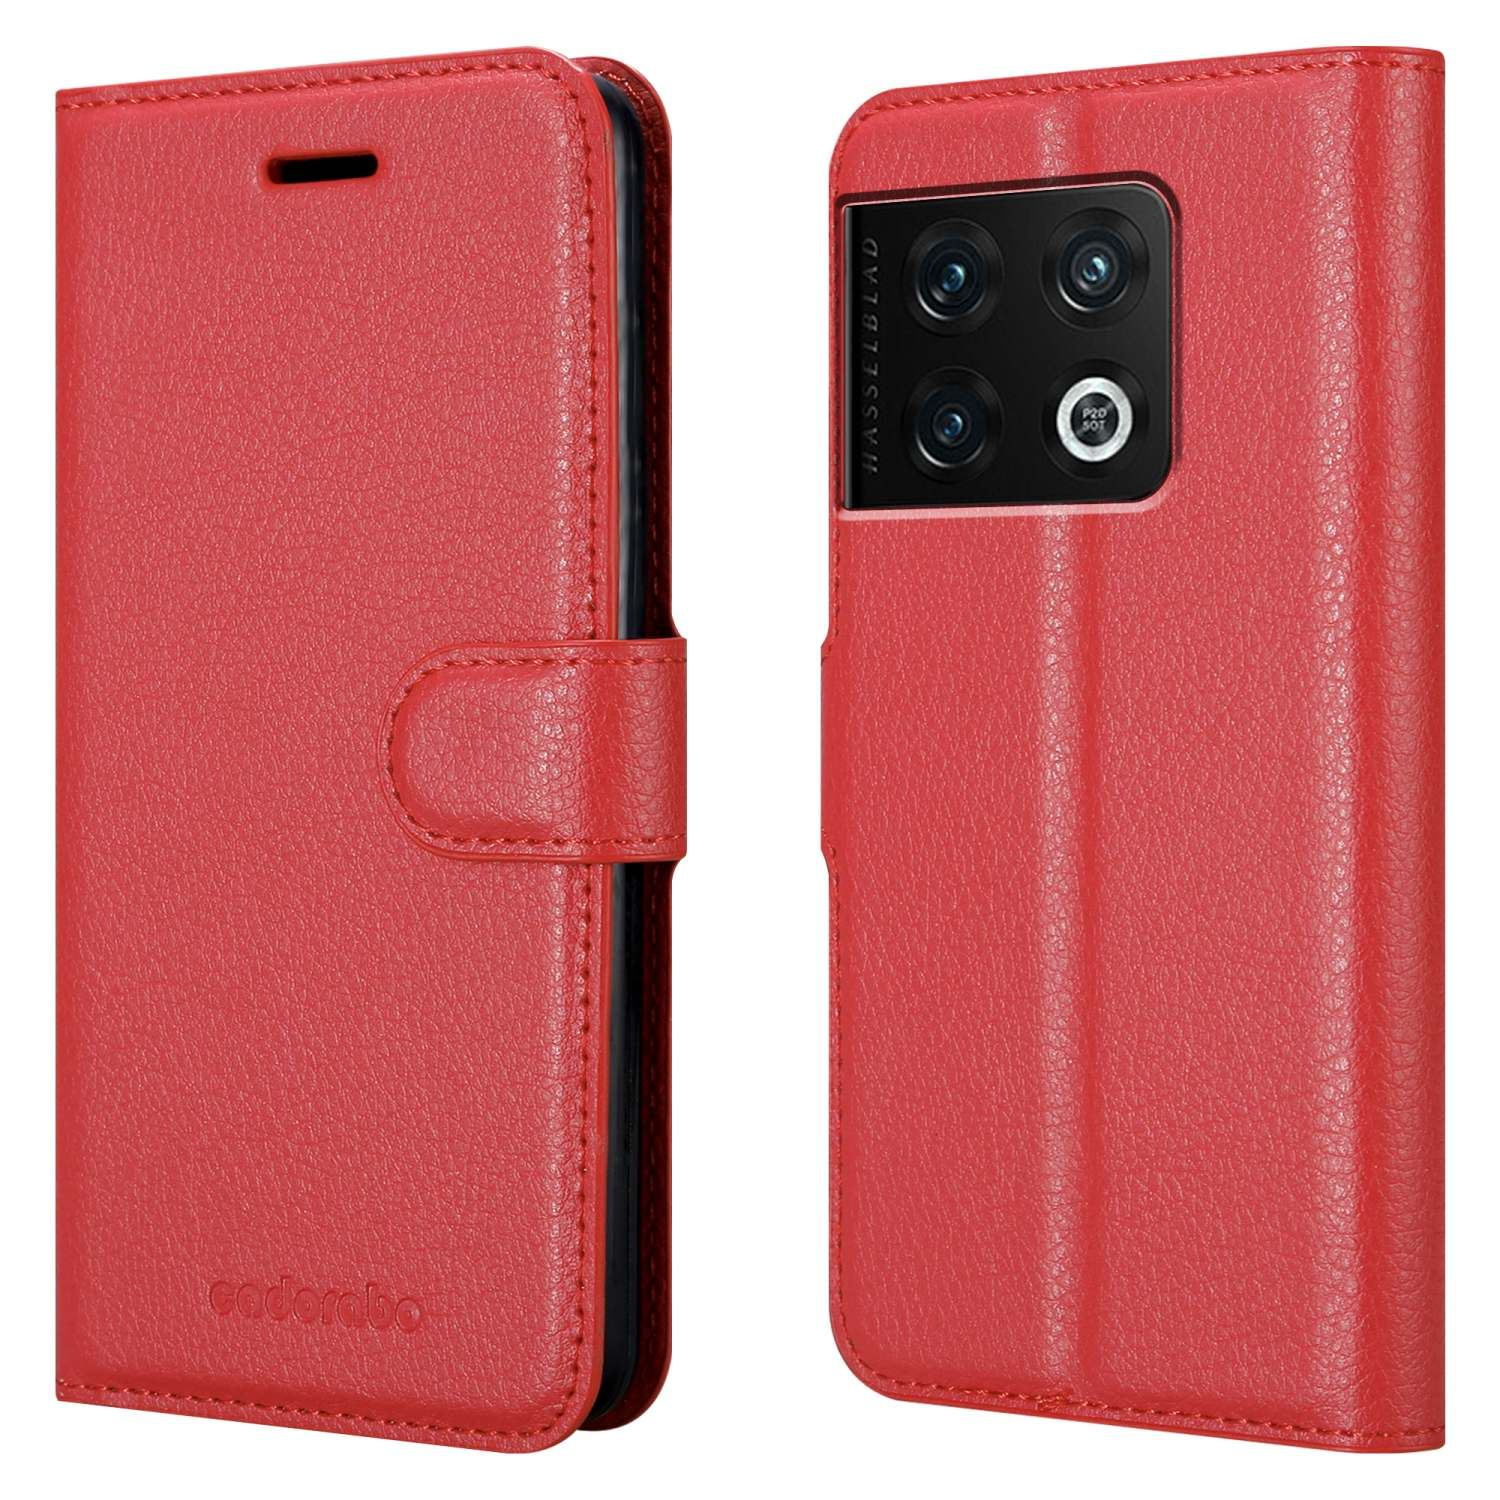 CADORABO Bookcover, ROT PRO KARMIN 5G, Standfunktion, Hülle Book 10 OnePlus,